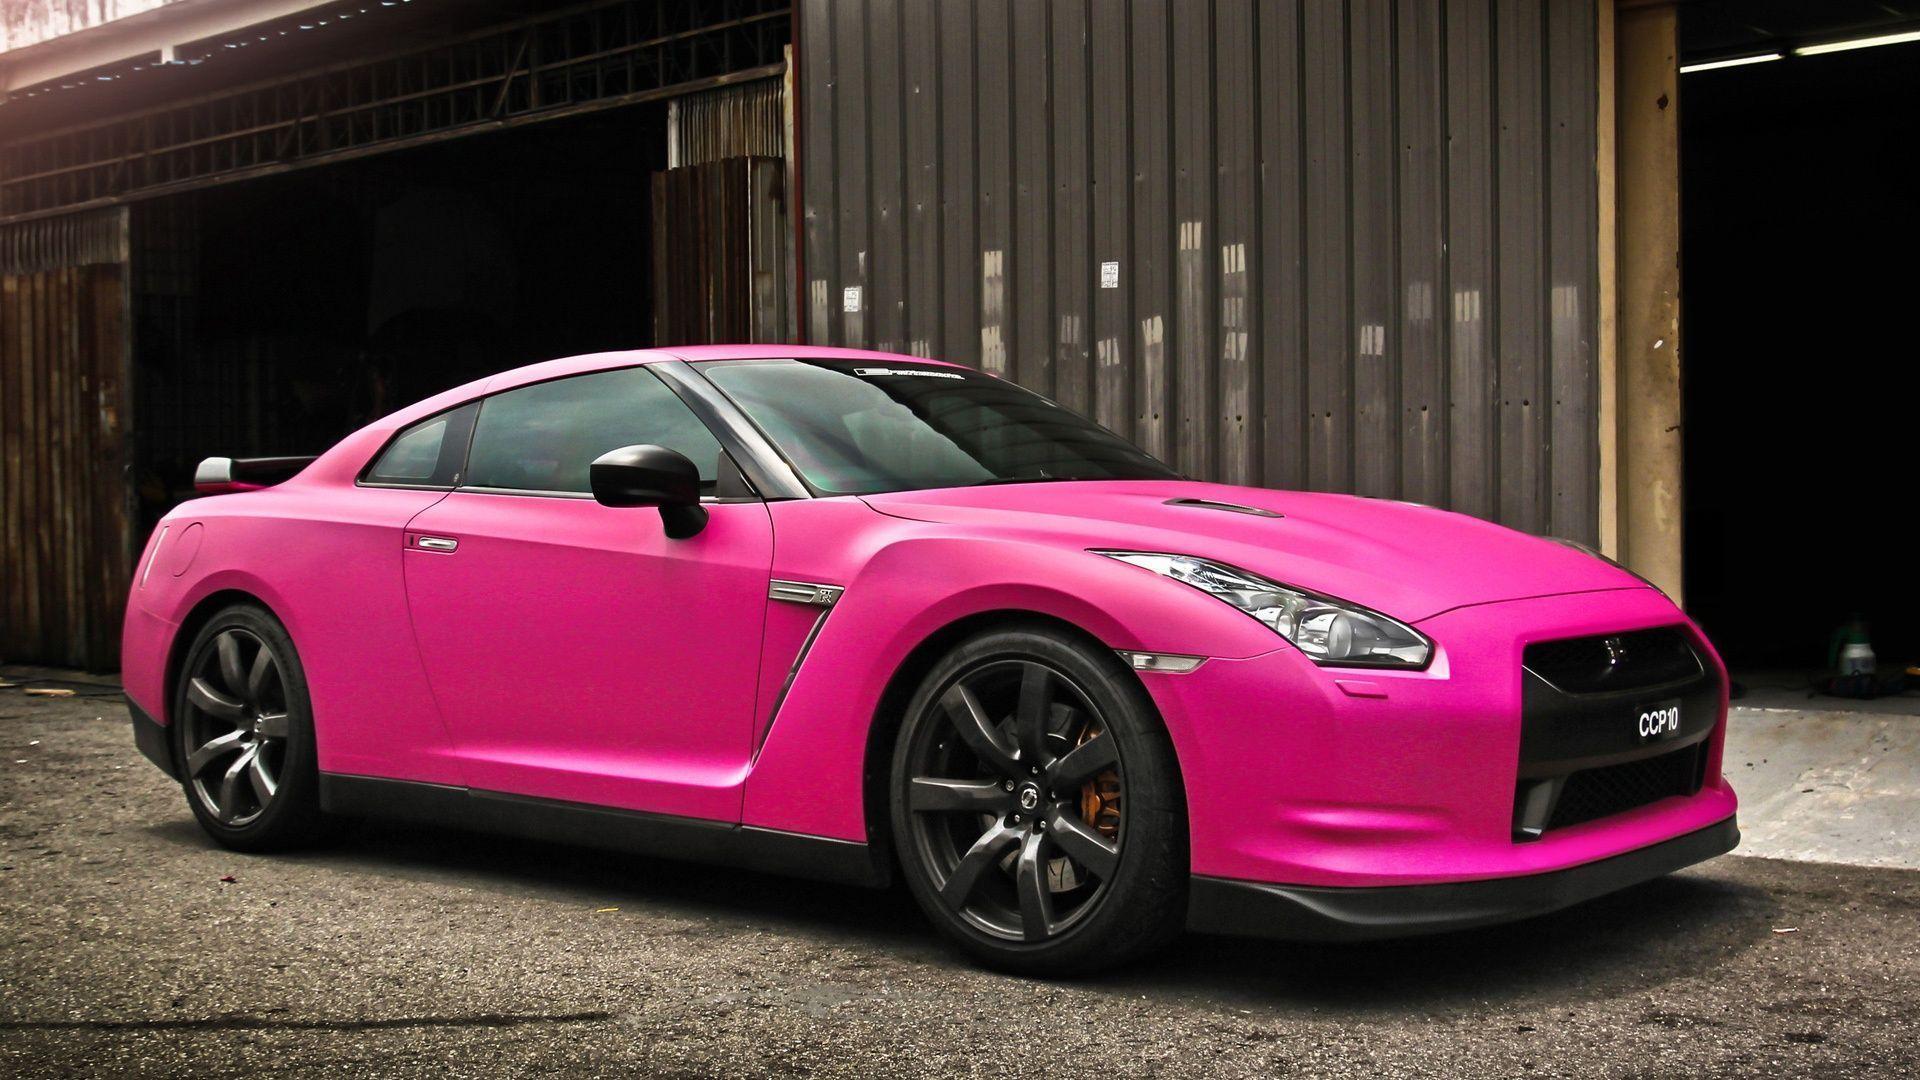 Awesome Pink Car Wallpaper 35176 1920x1080 px